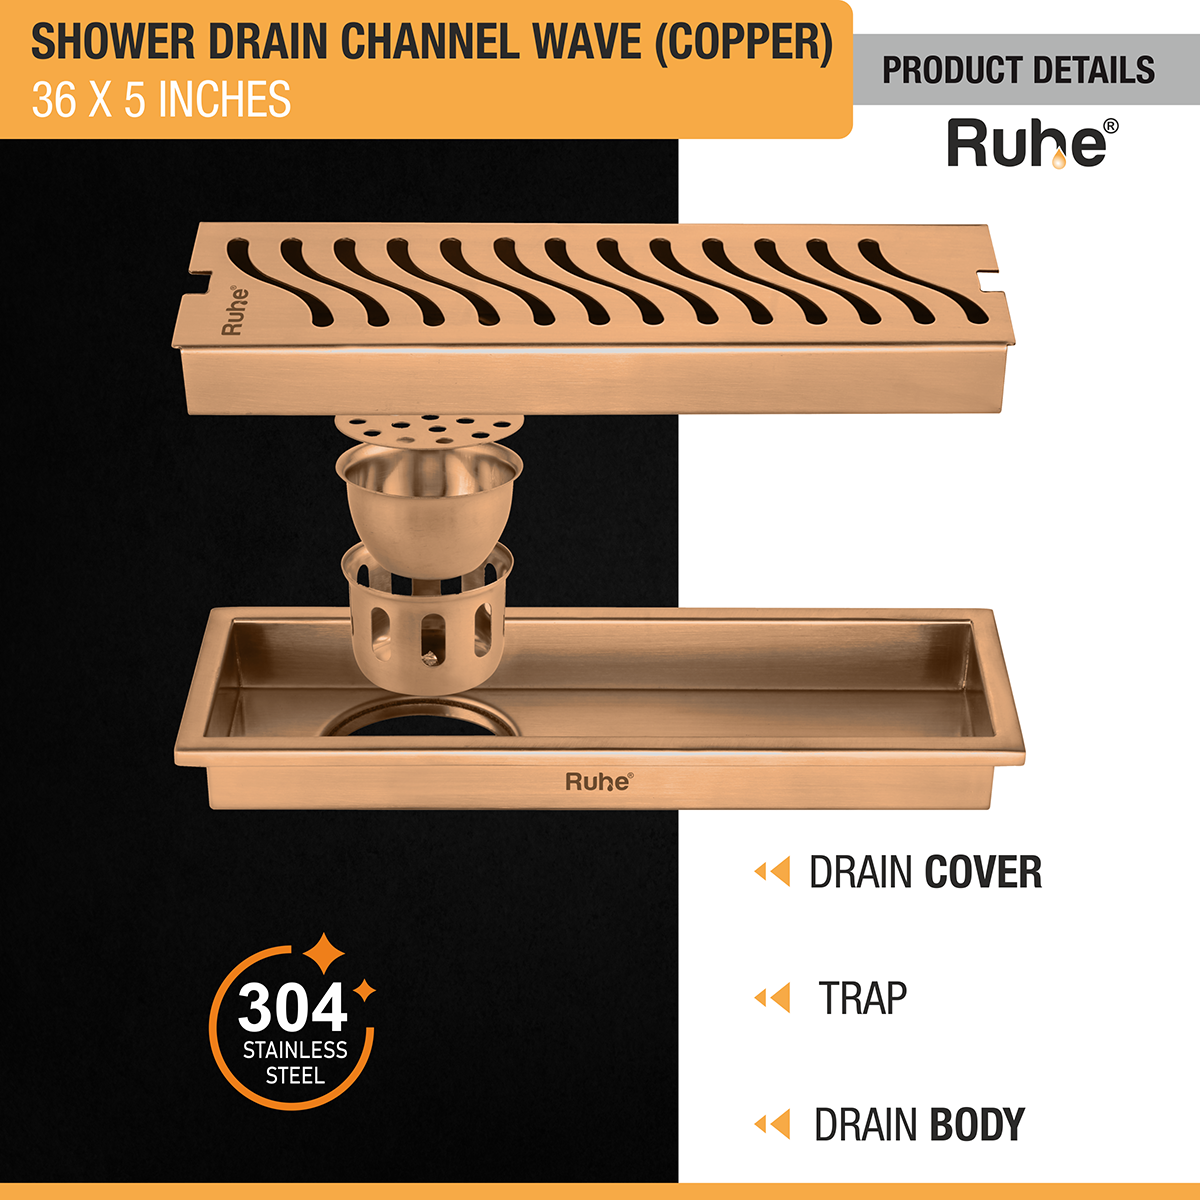 Wave Shower Drain Channel (36 x 5 Inches) ROSE GOLD/ANTIQUE COPPER product details